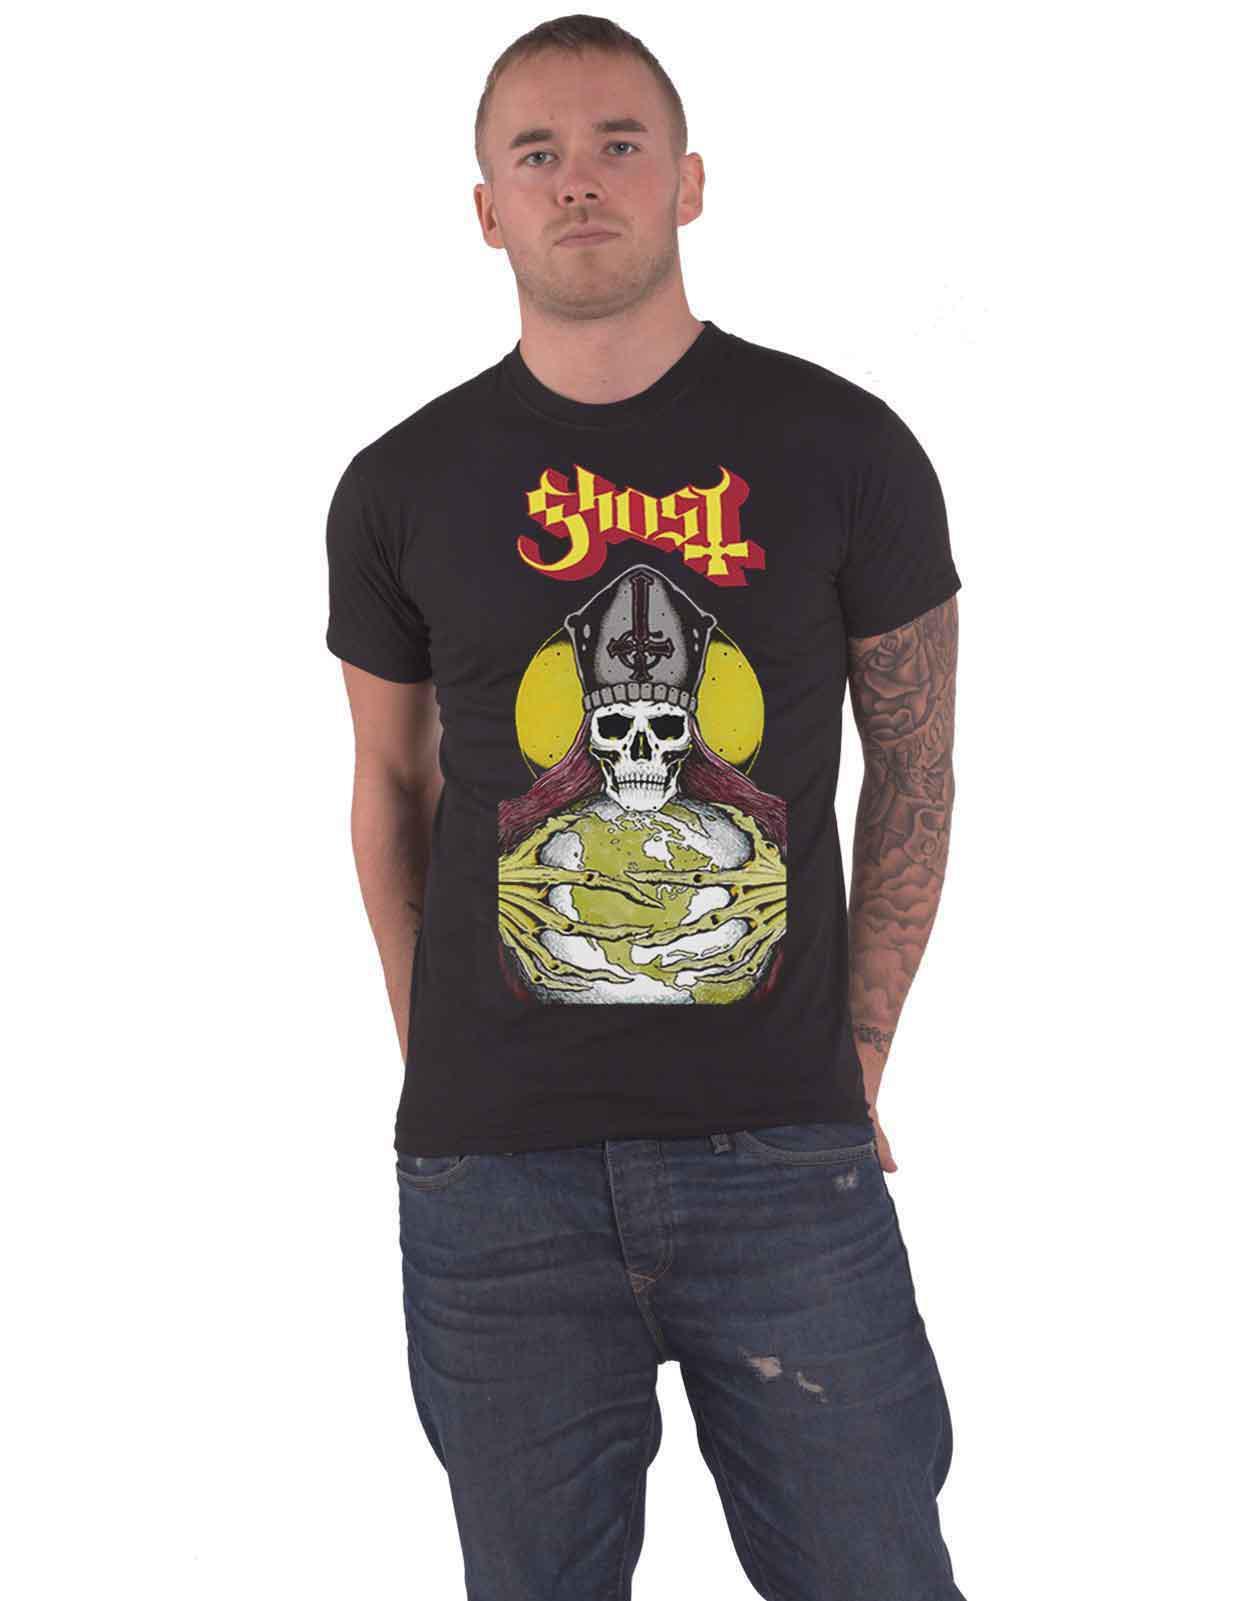 Ghost T Shirt Blood Ceremony band logo new Official Mens Black